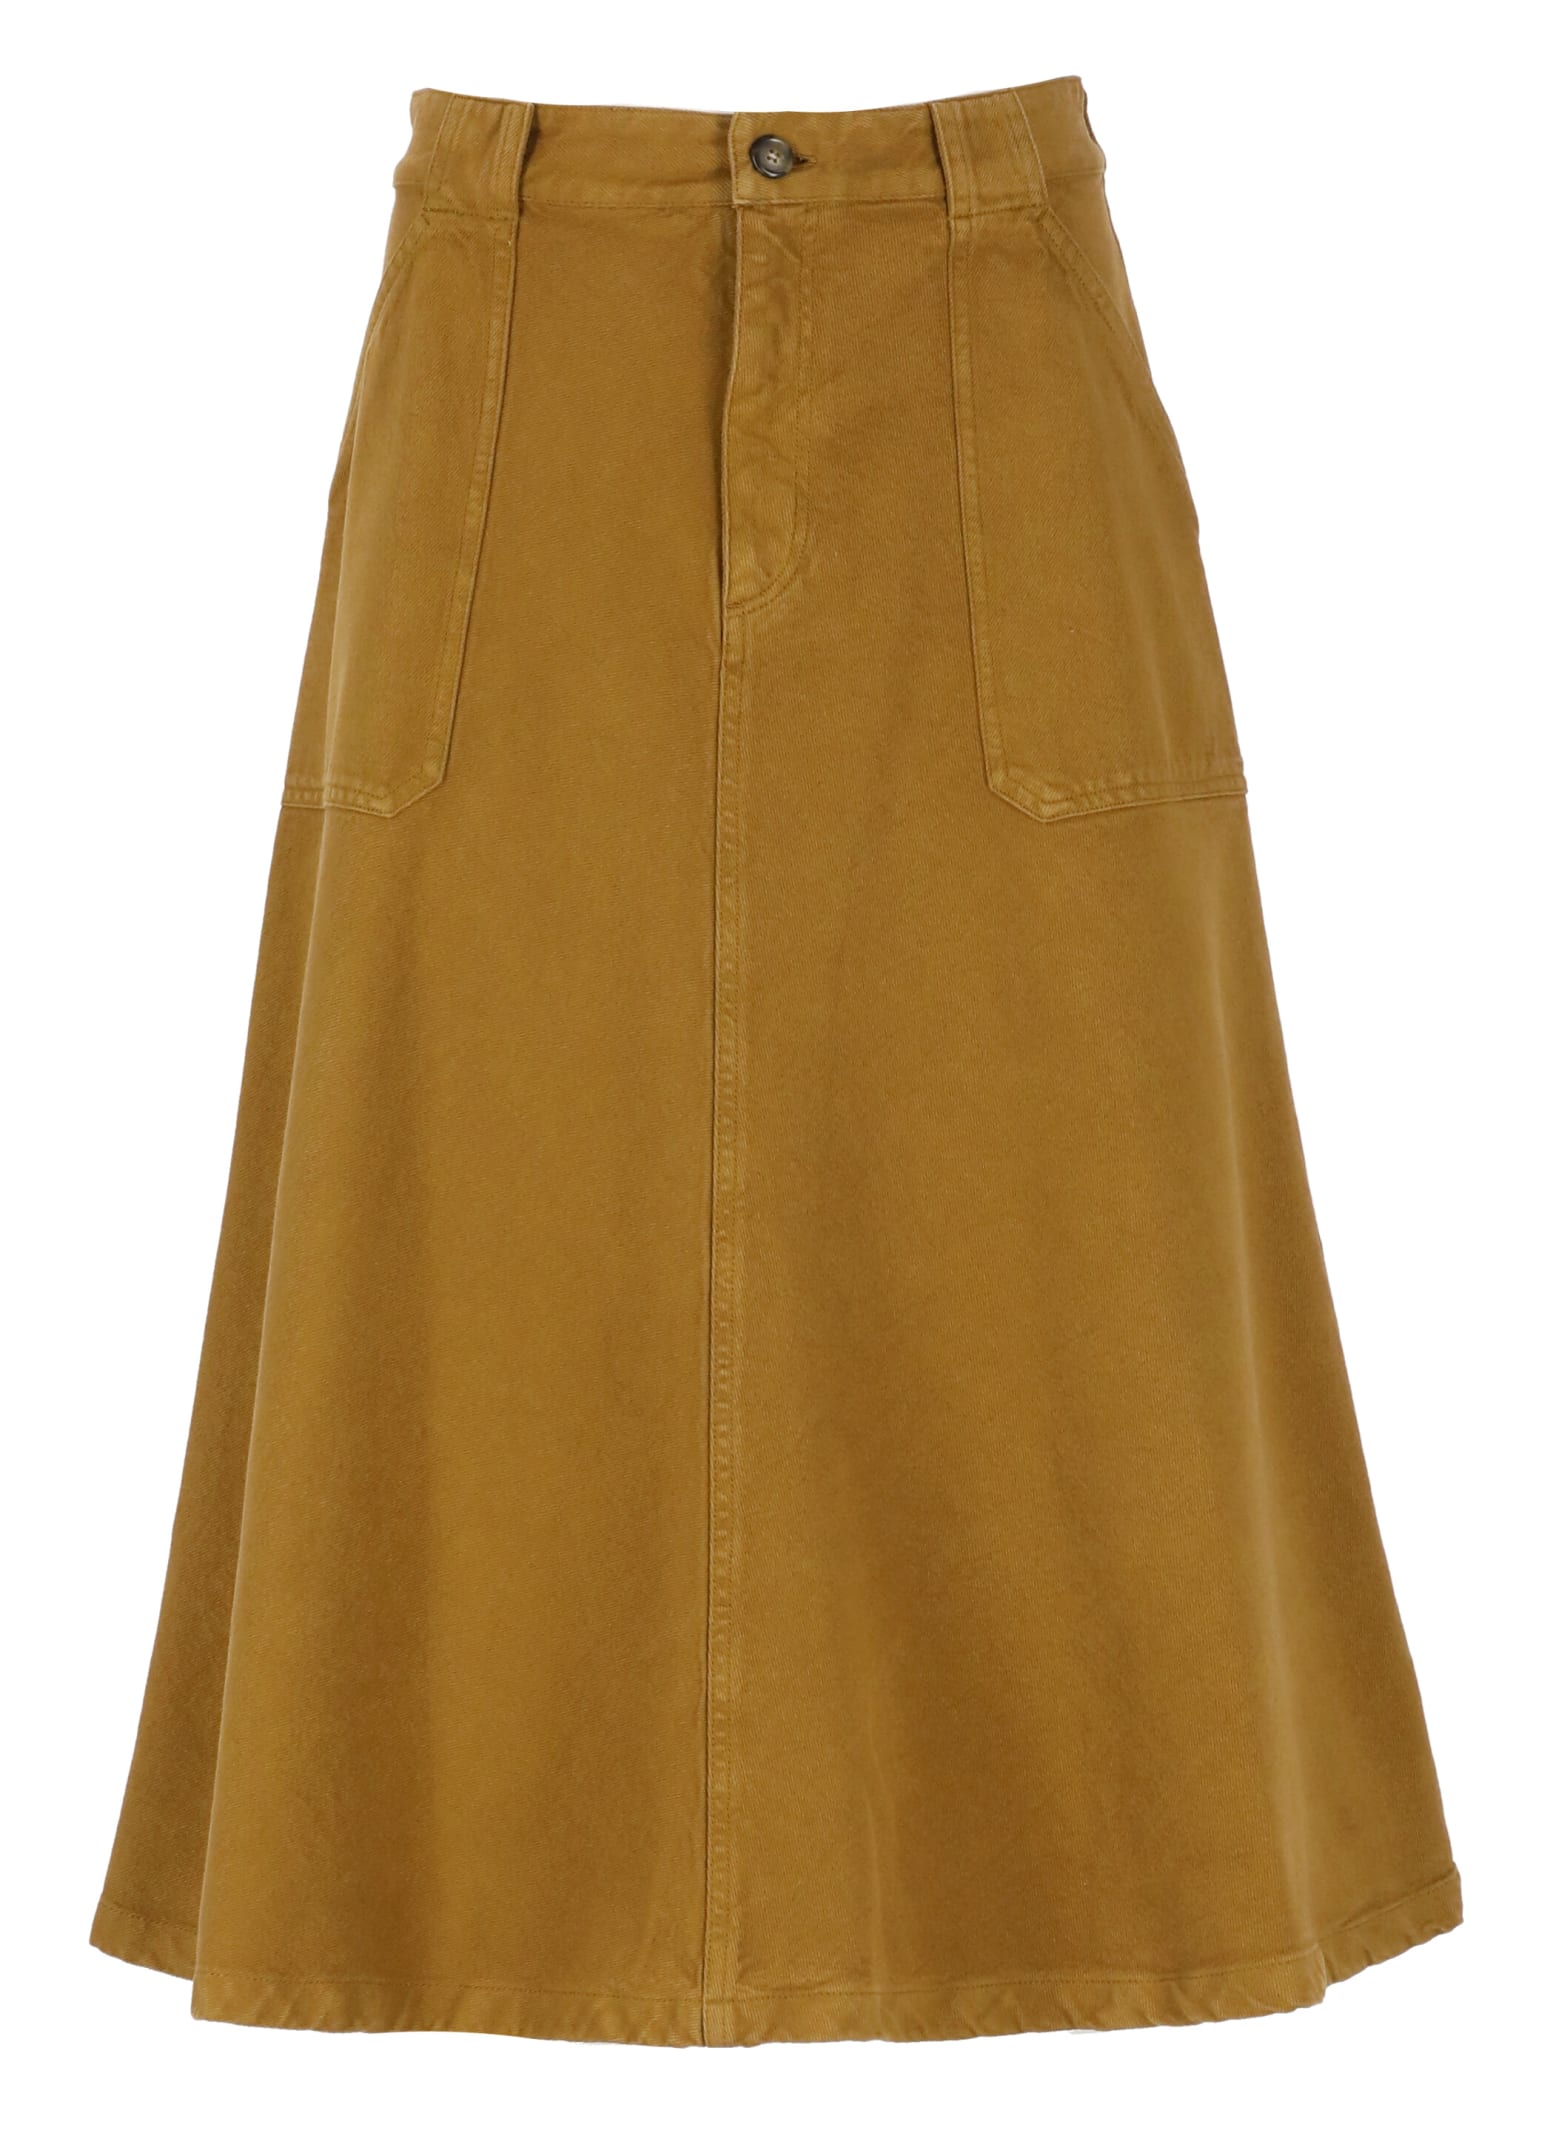 A. P.C. laurie Midi Skirt